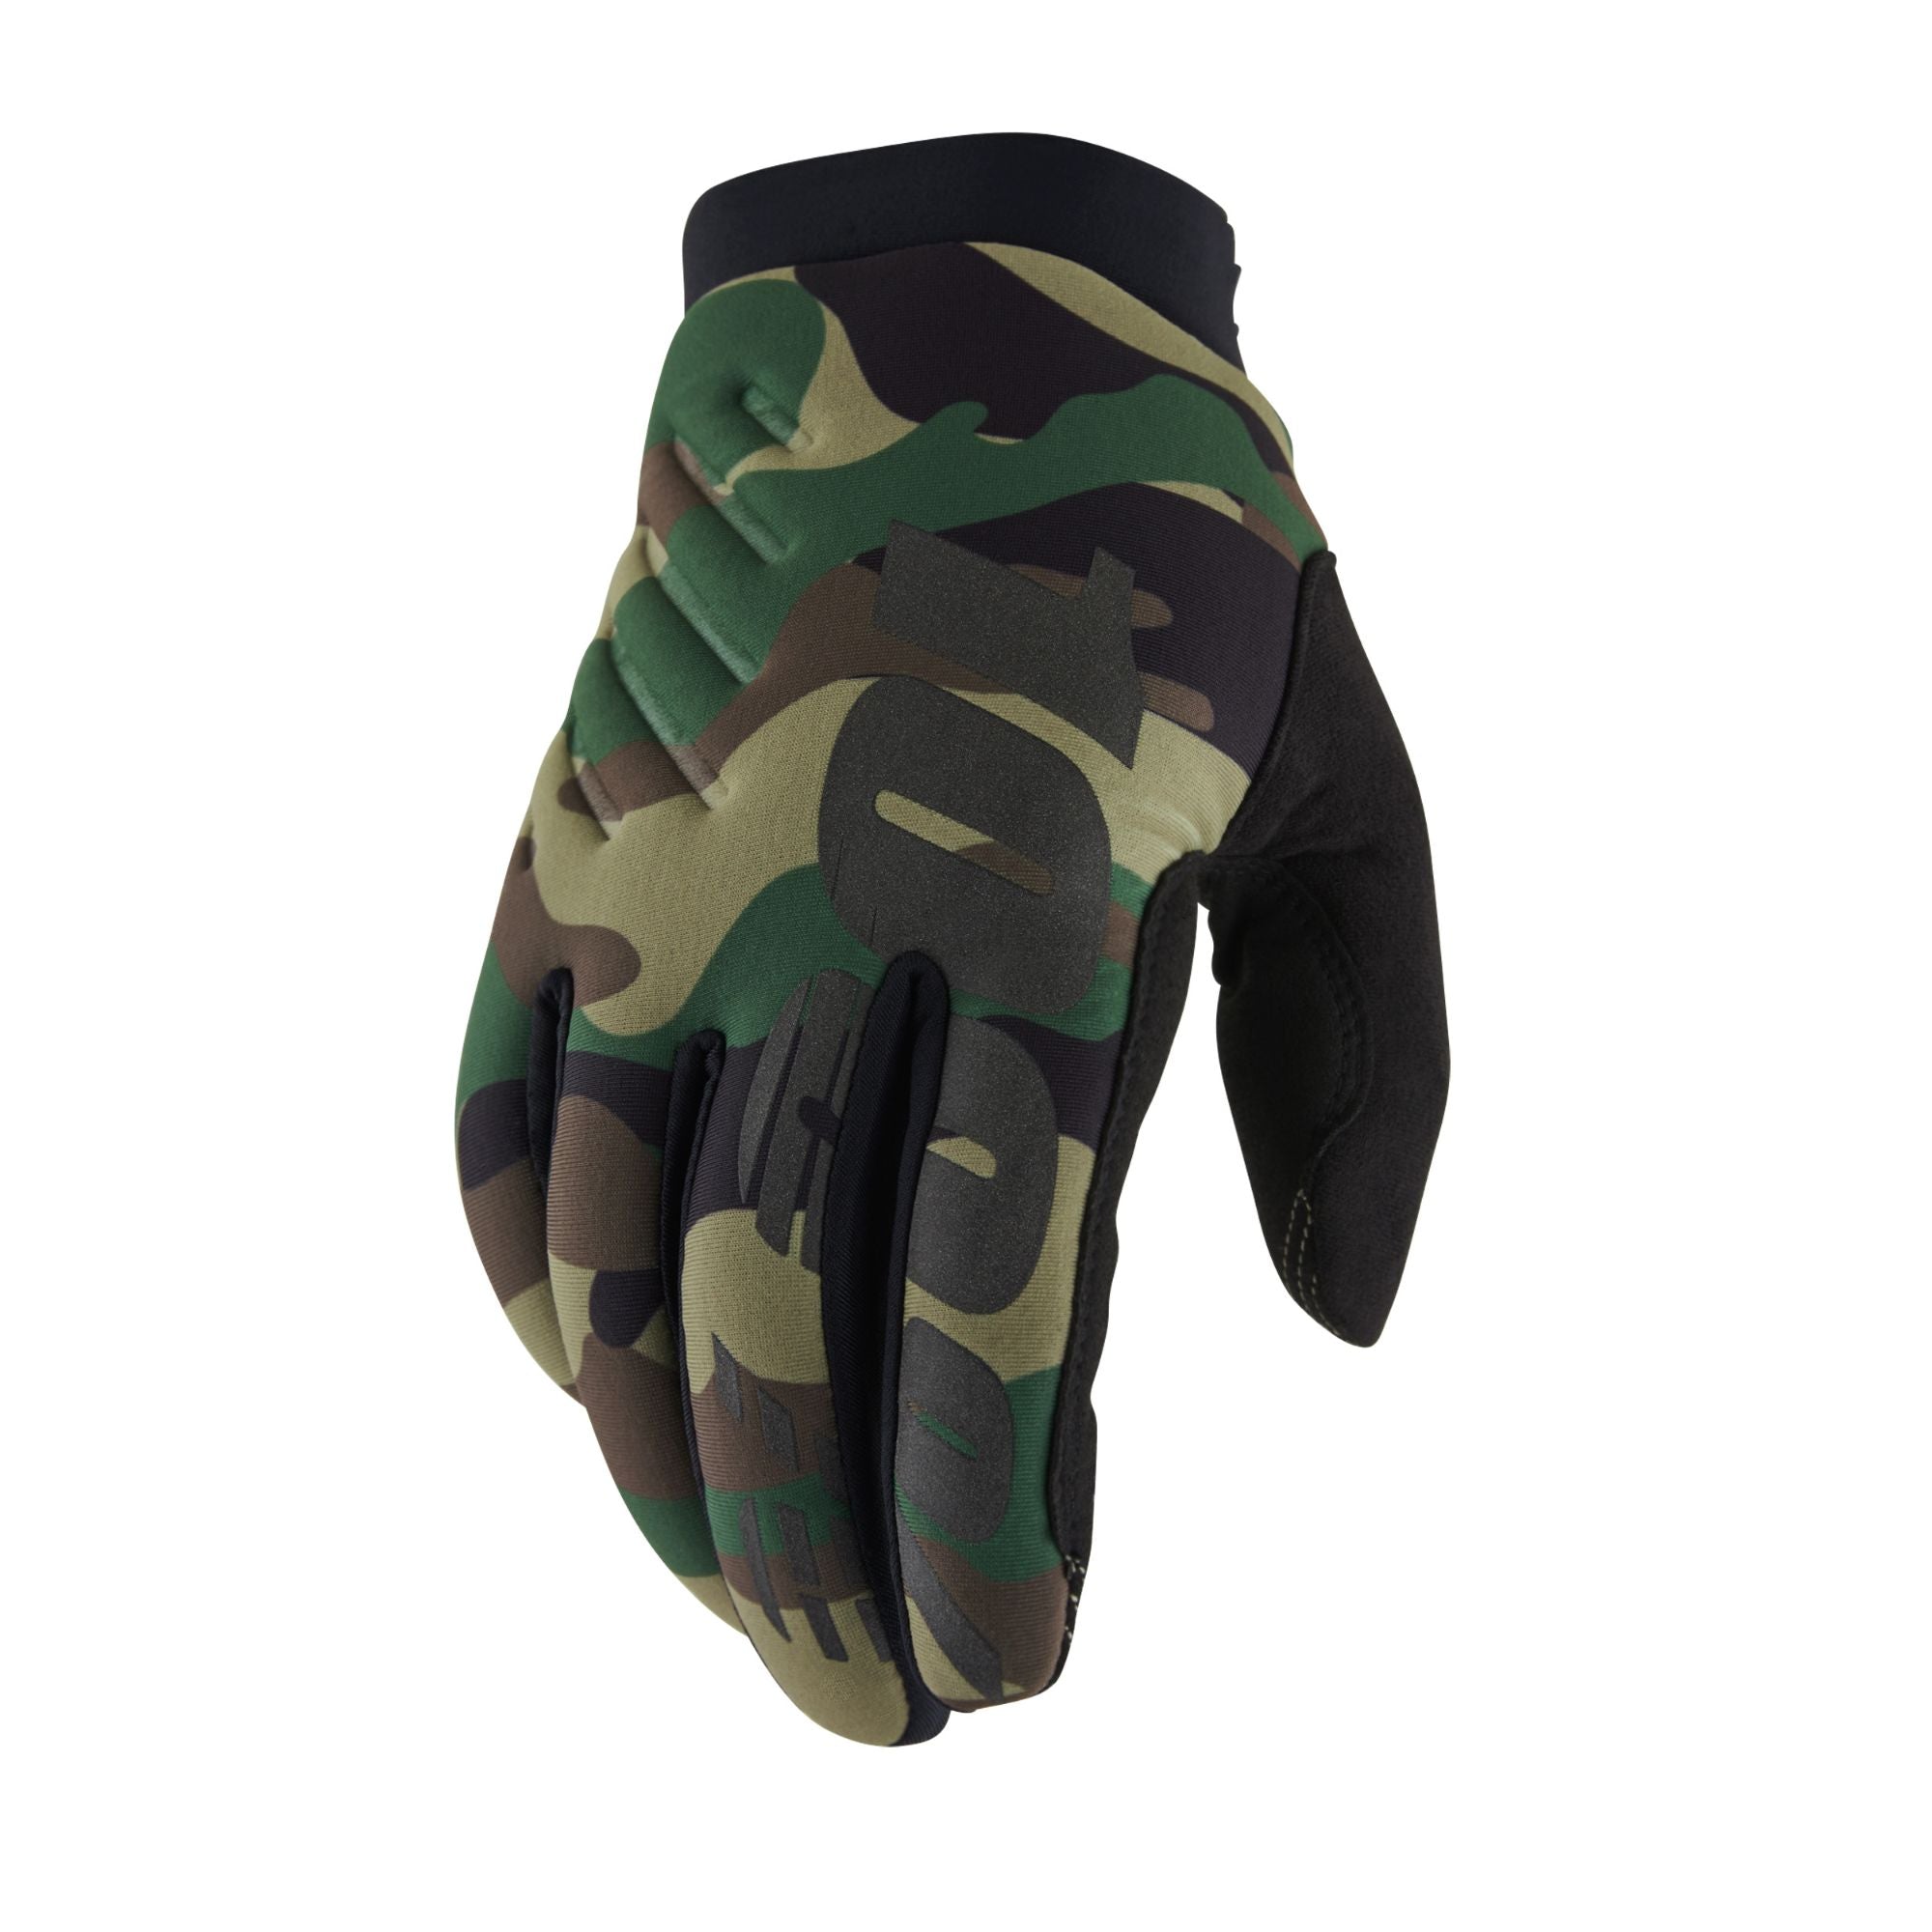 Men's Full Finger Cycling Gloves 100% Brisker AW22 Cold Weather Camo/Black X Large